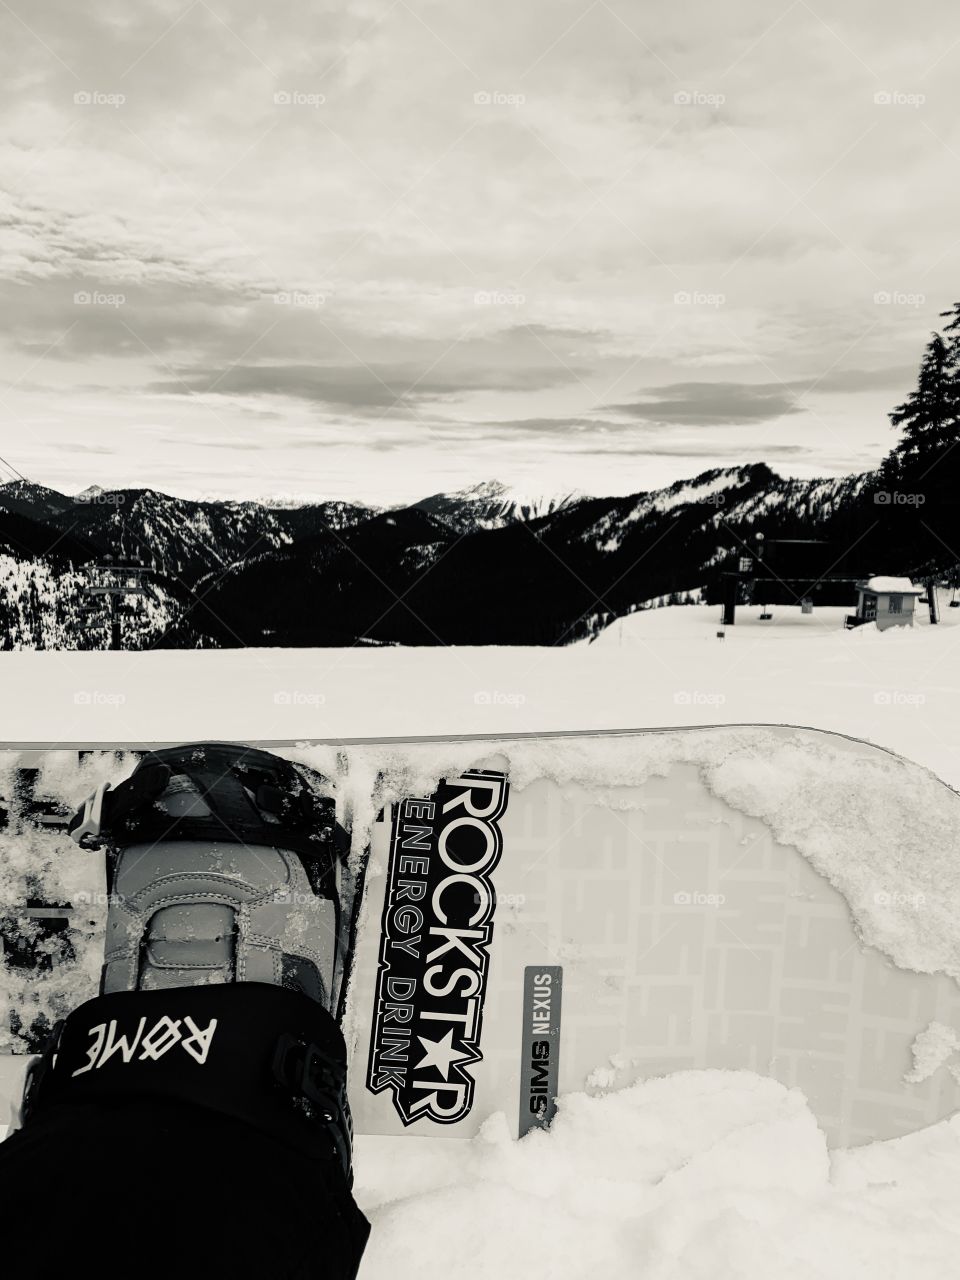 Snowboarding in the PNW